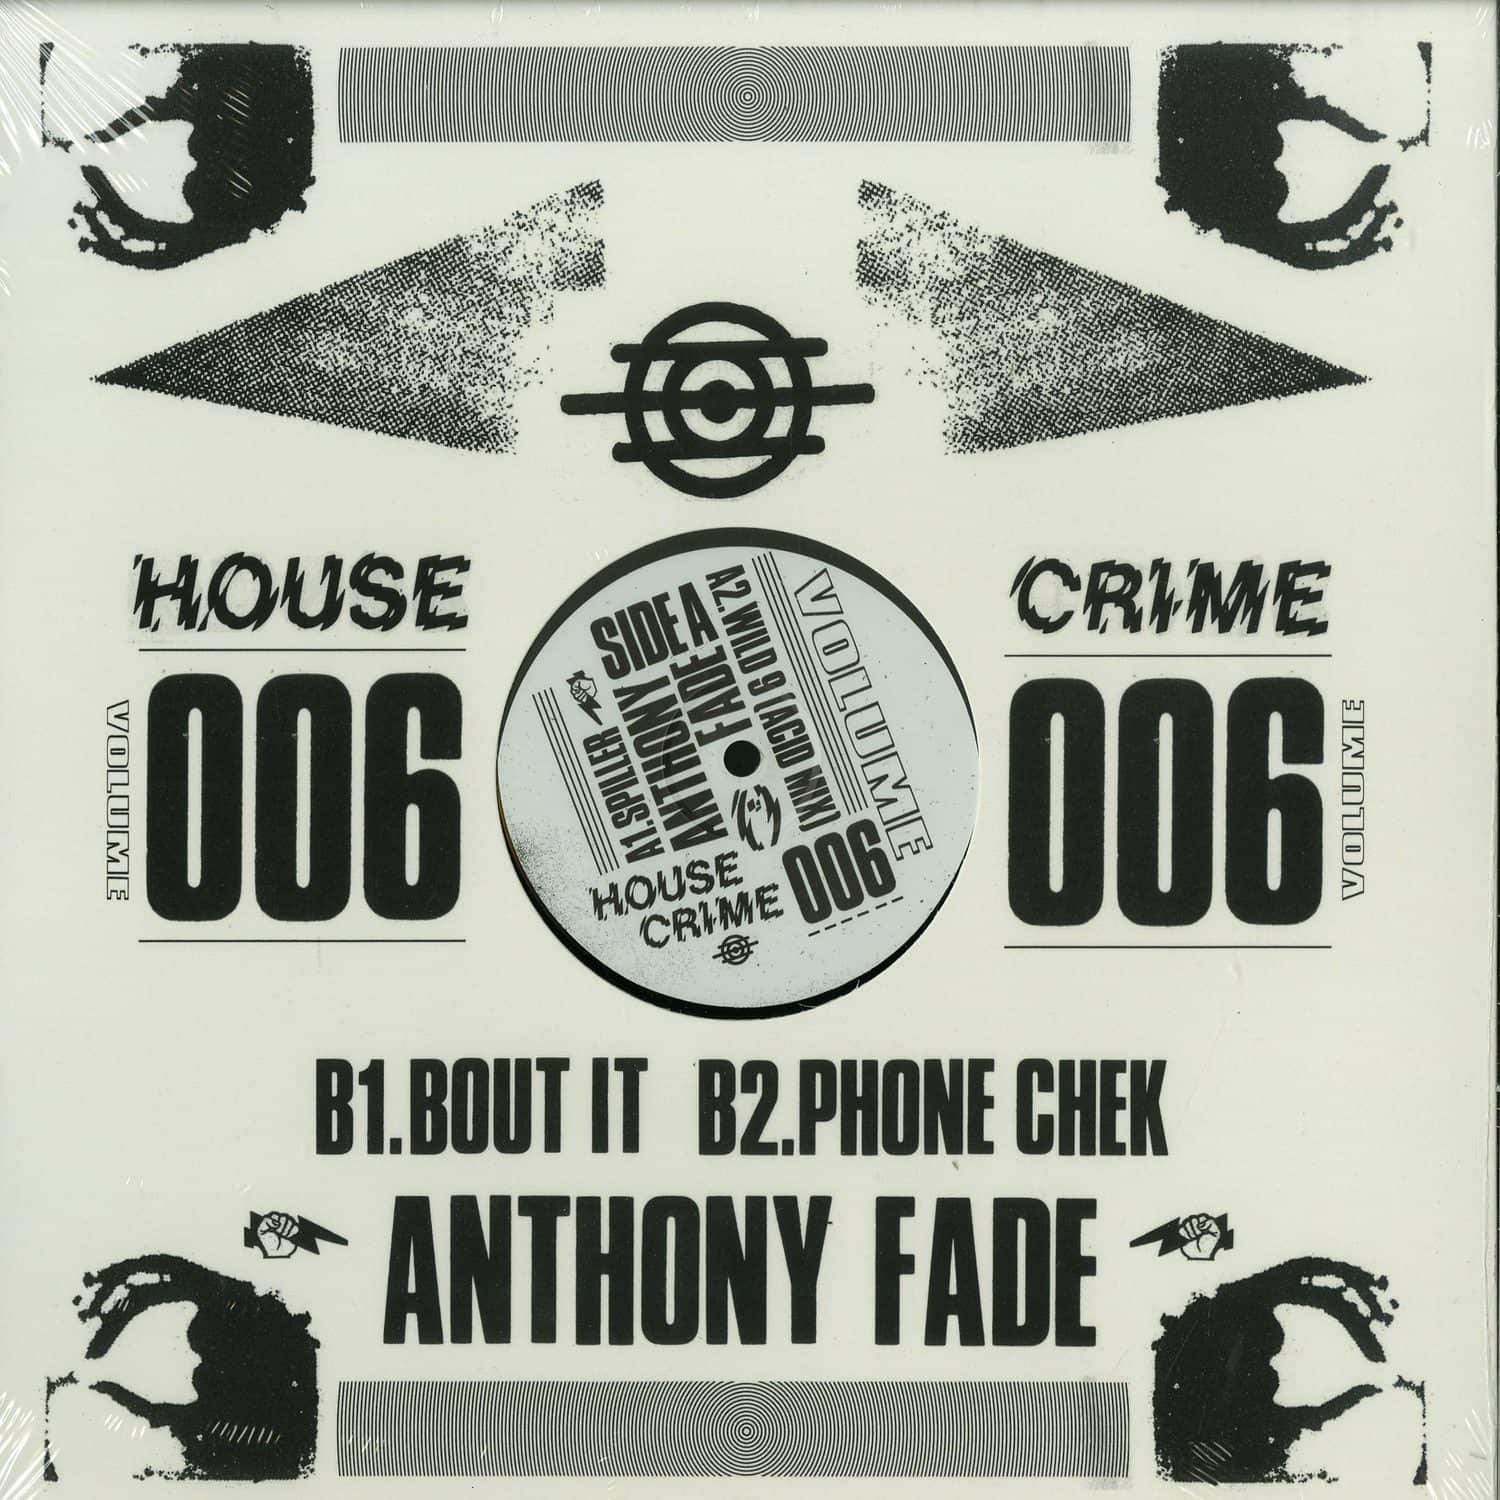 Anthony Fade - HOUSE CRIME VOL.6 